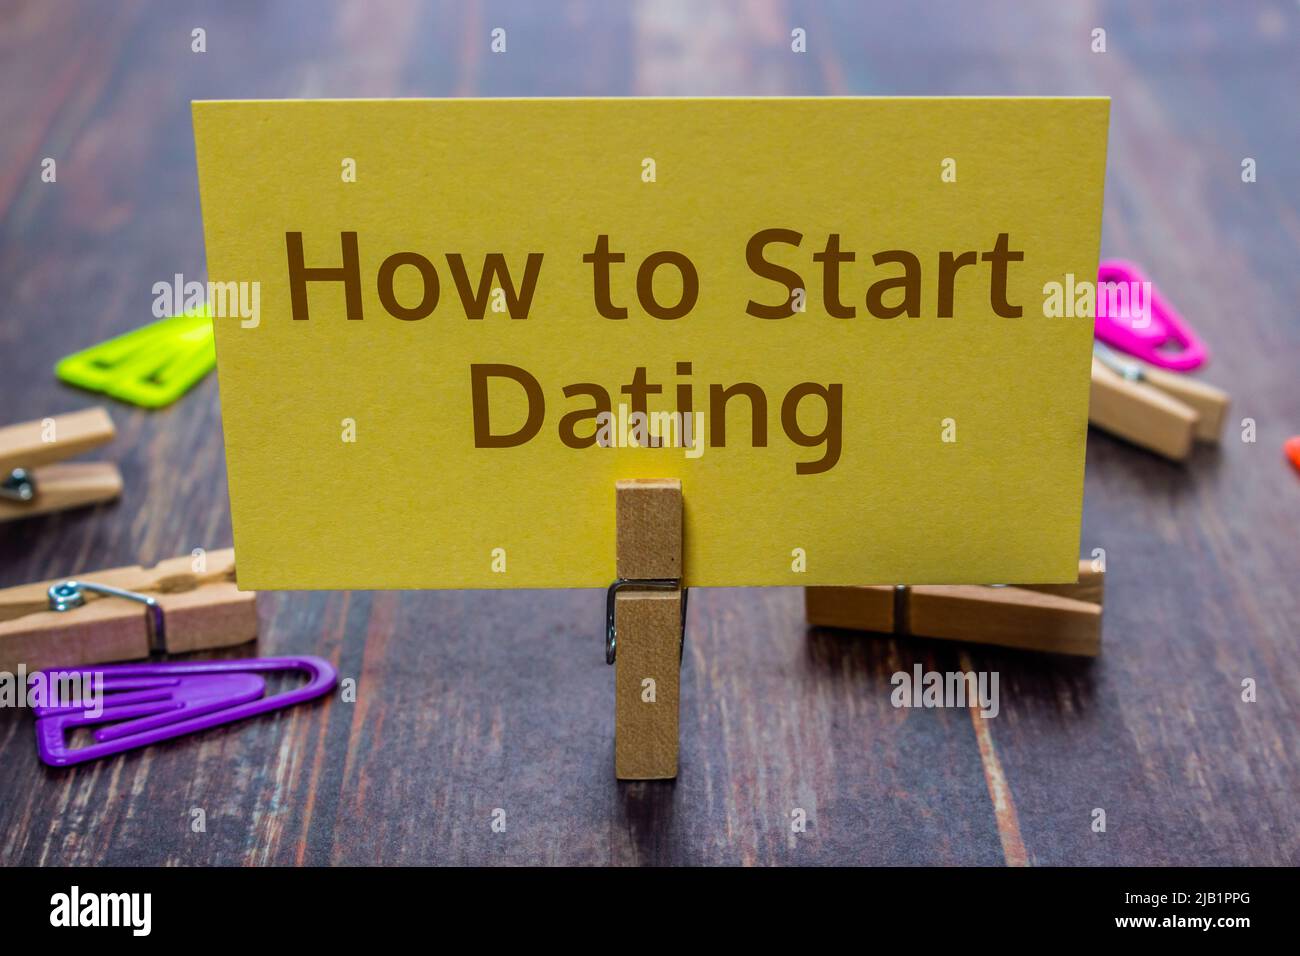 How To Start A Dating Service